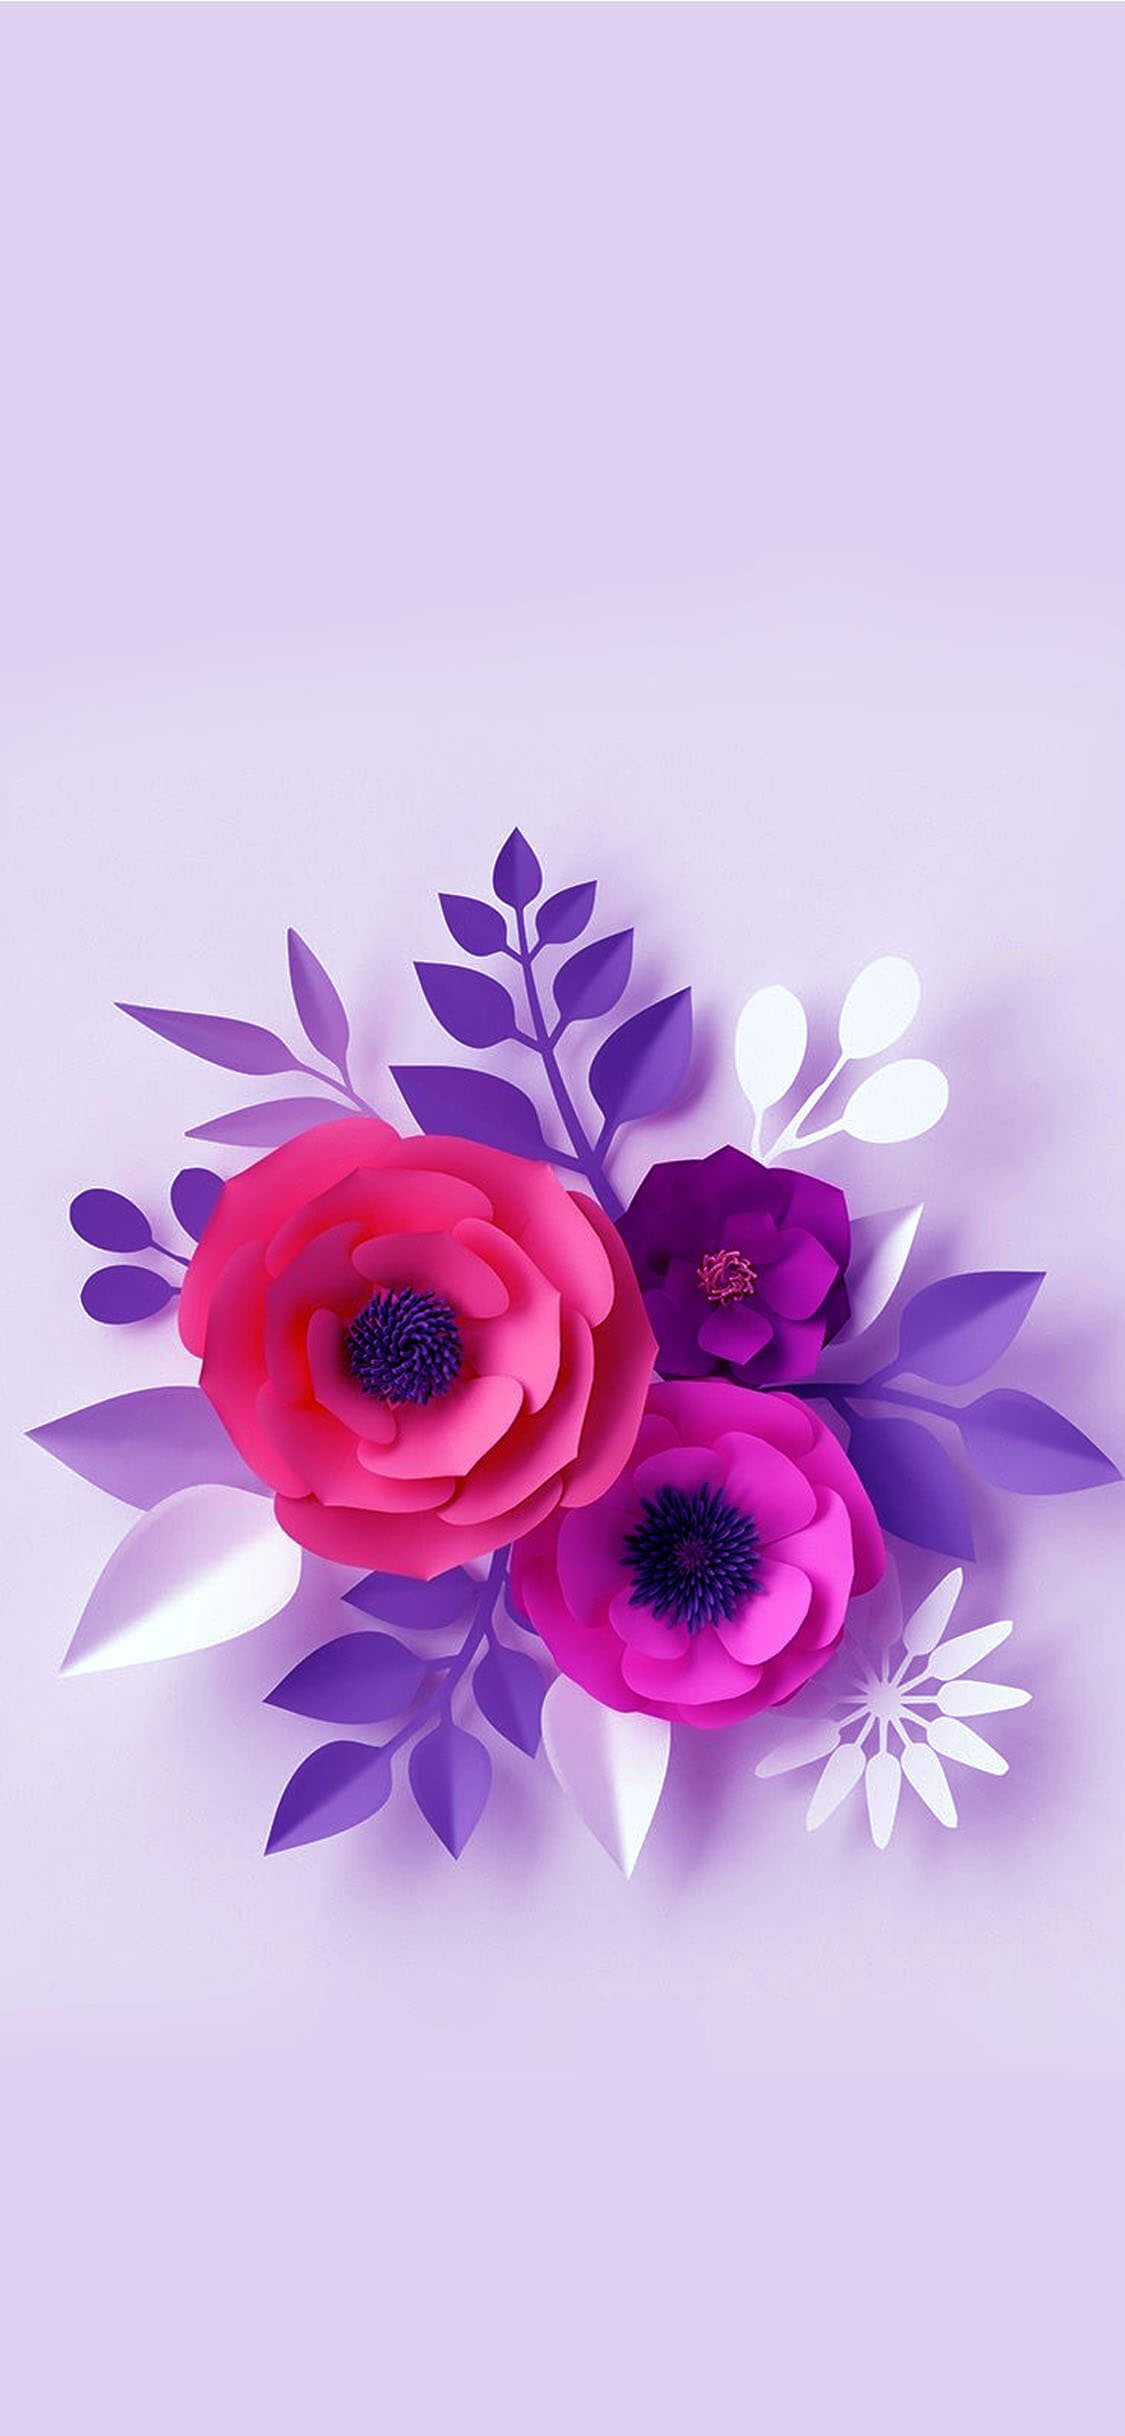 25 Beautiful Flower Wallpapers For iPhone Free Download